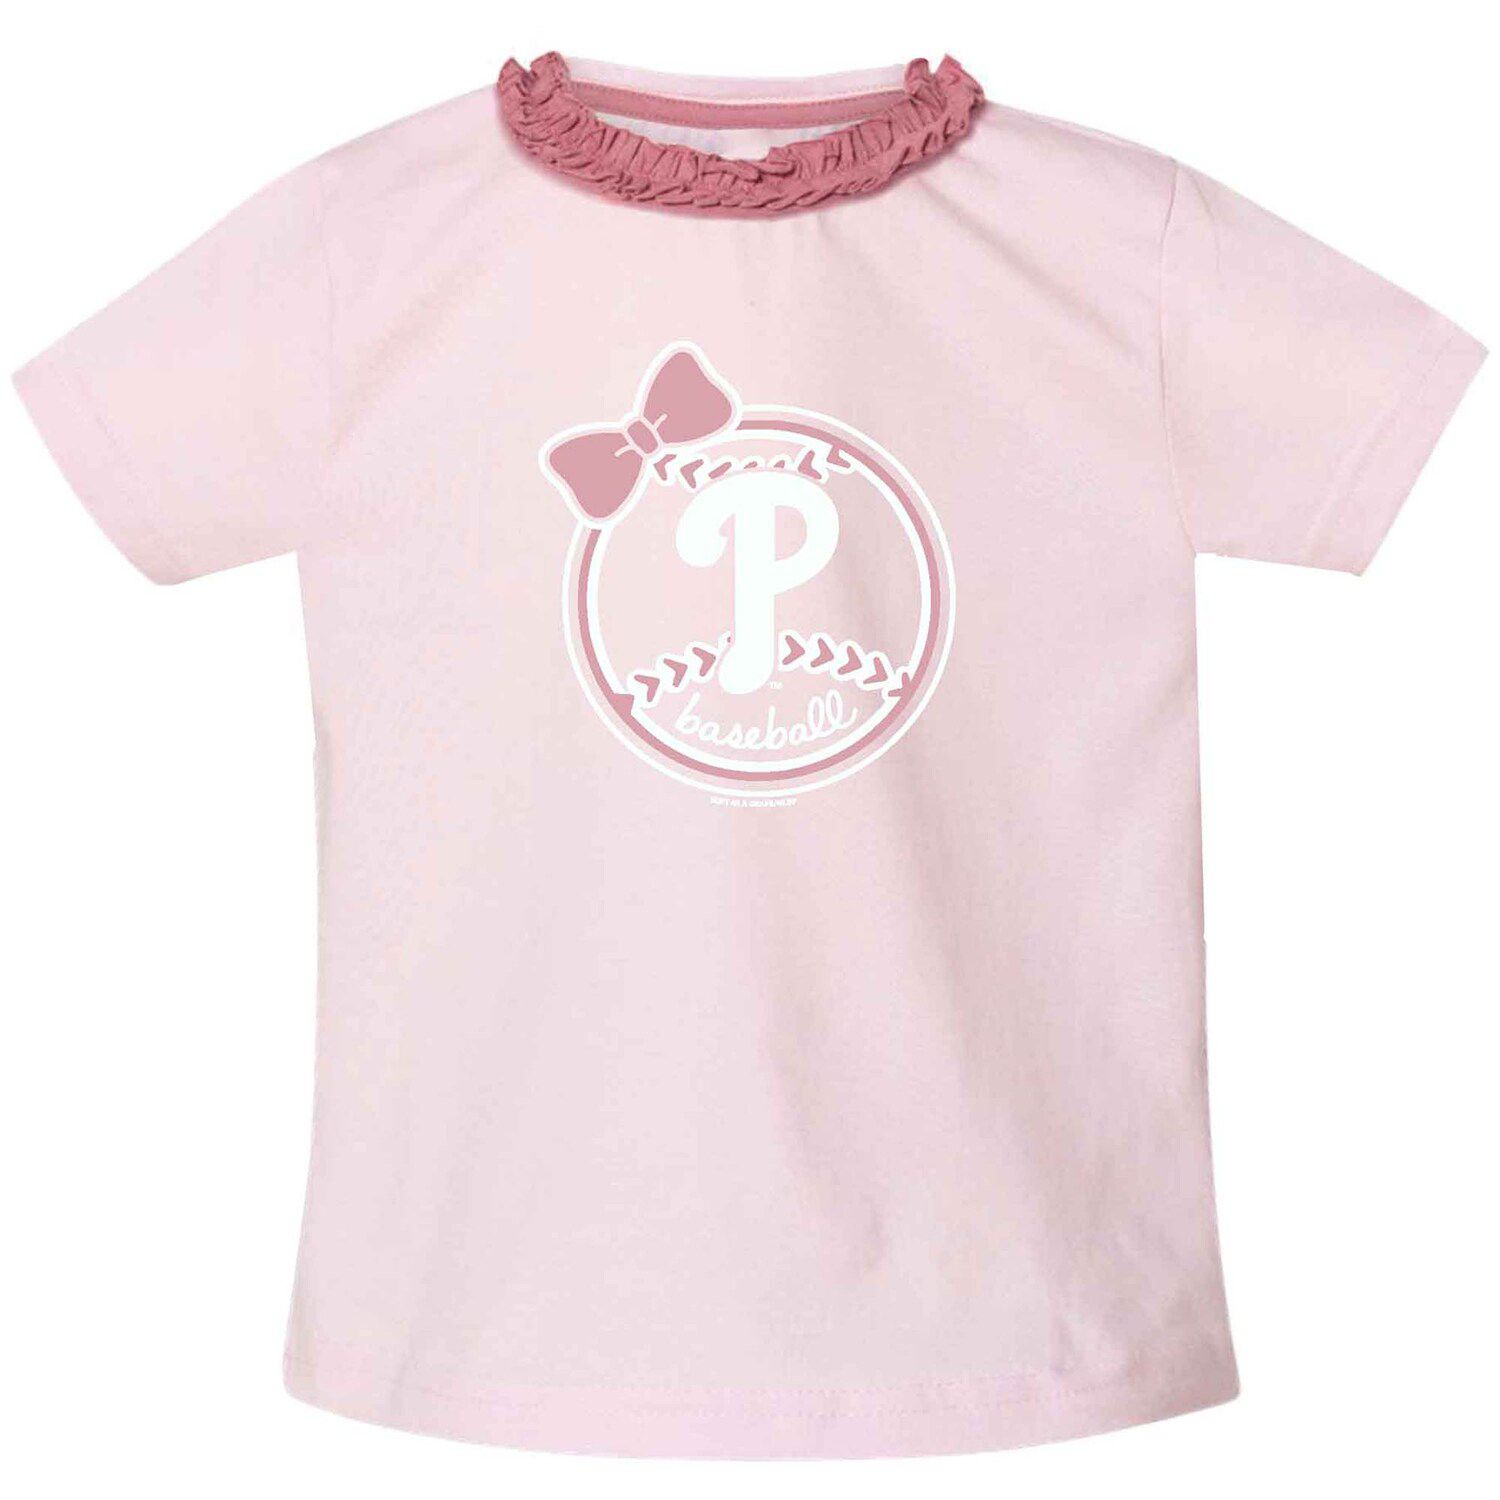 Image for Unbranded Girls Toddler Soft as a Grape Pink Philadelphia Phillies Ruffle Collar T-Shirt at Kohl's.